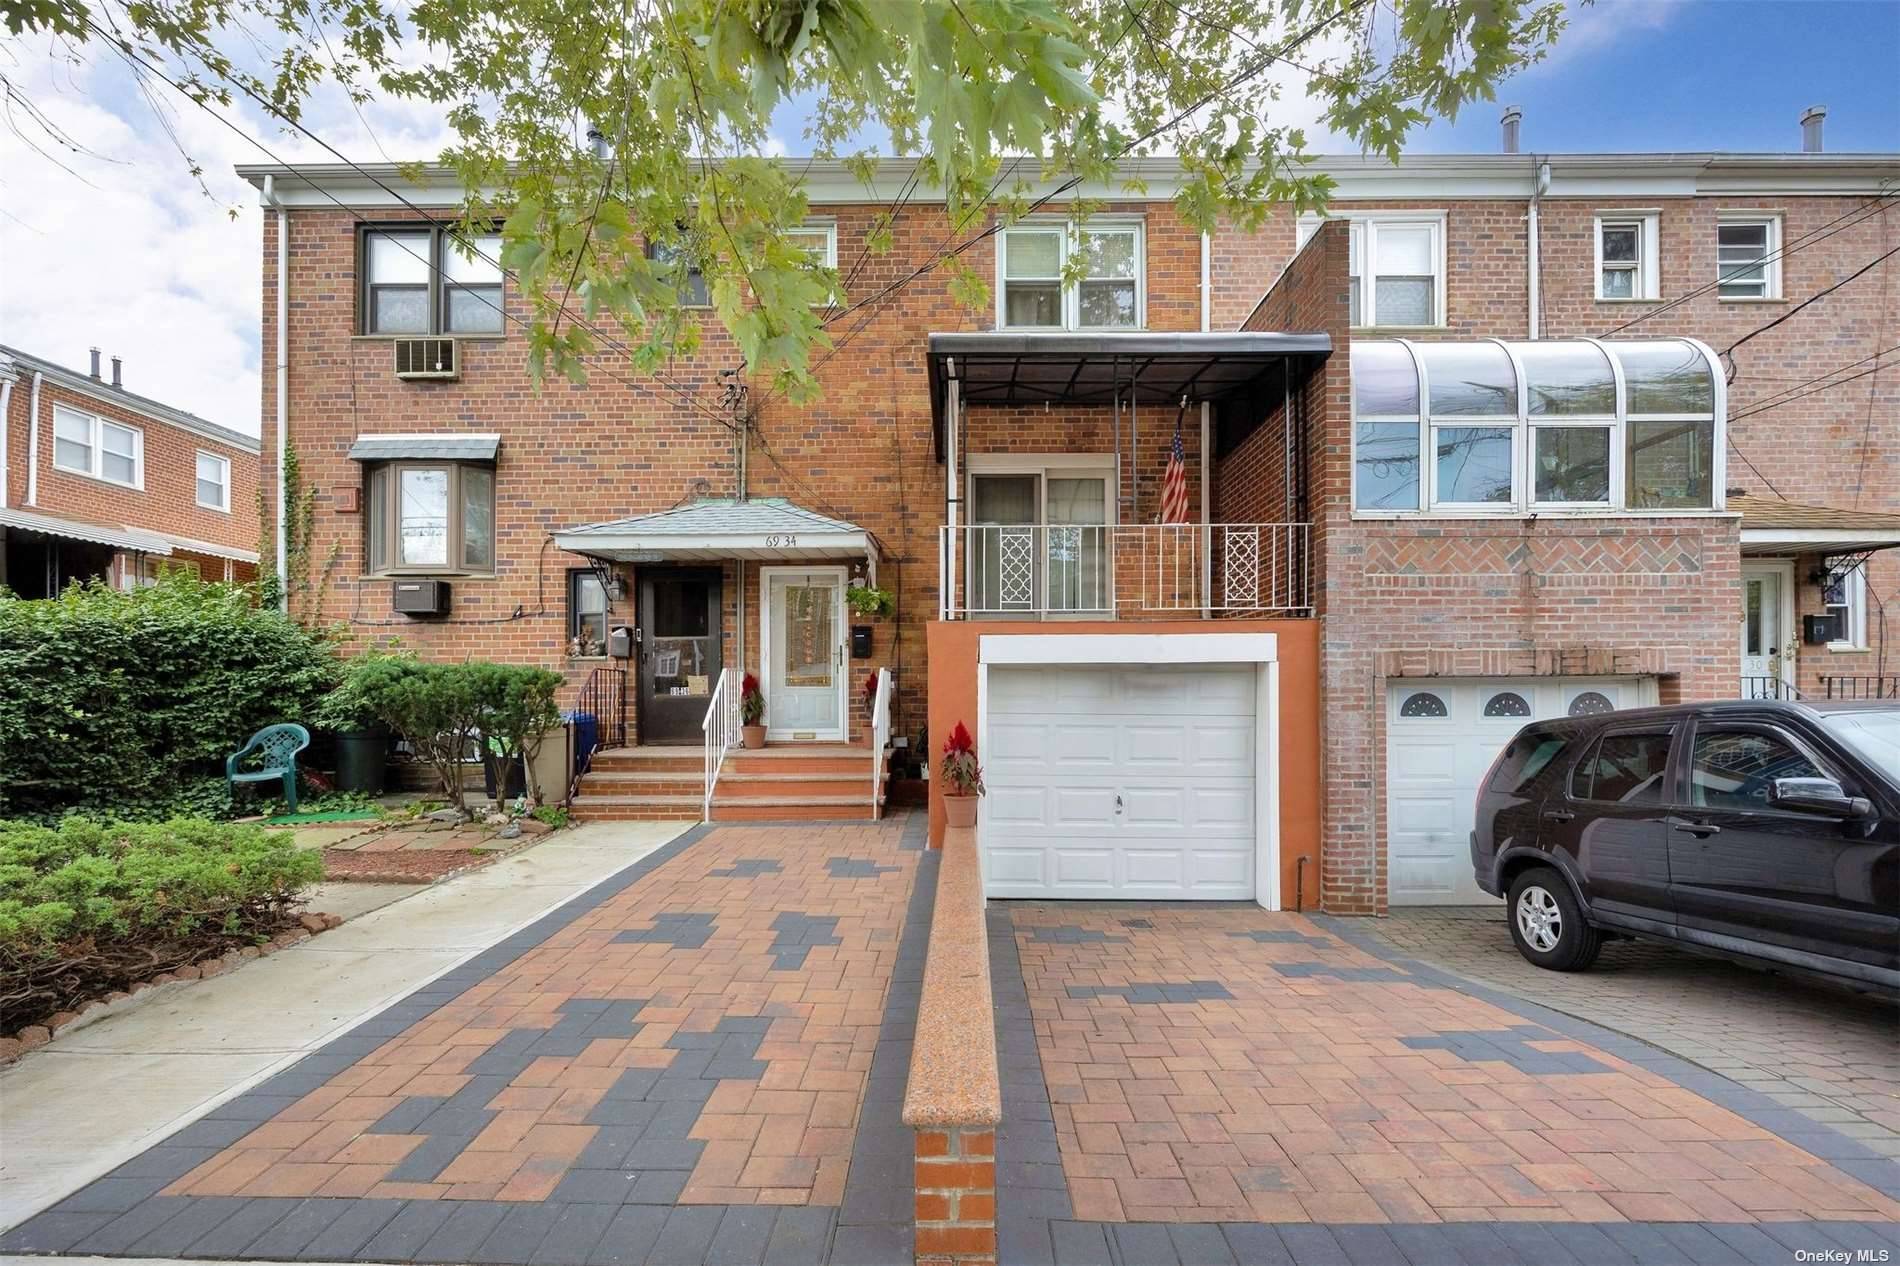 Move right into this lovely Brick 2 family home.